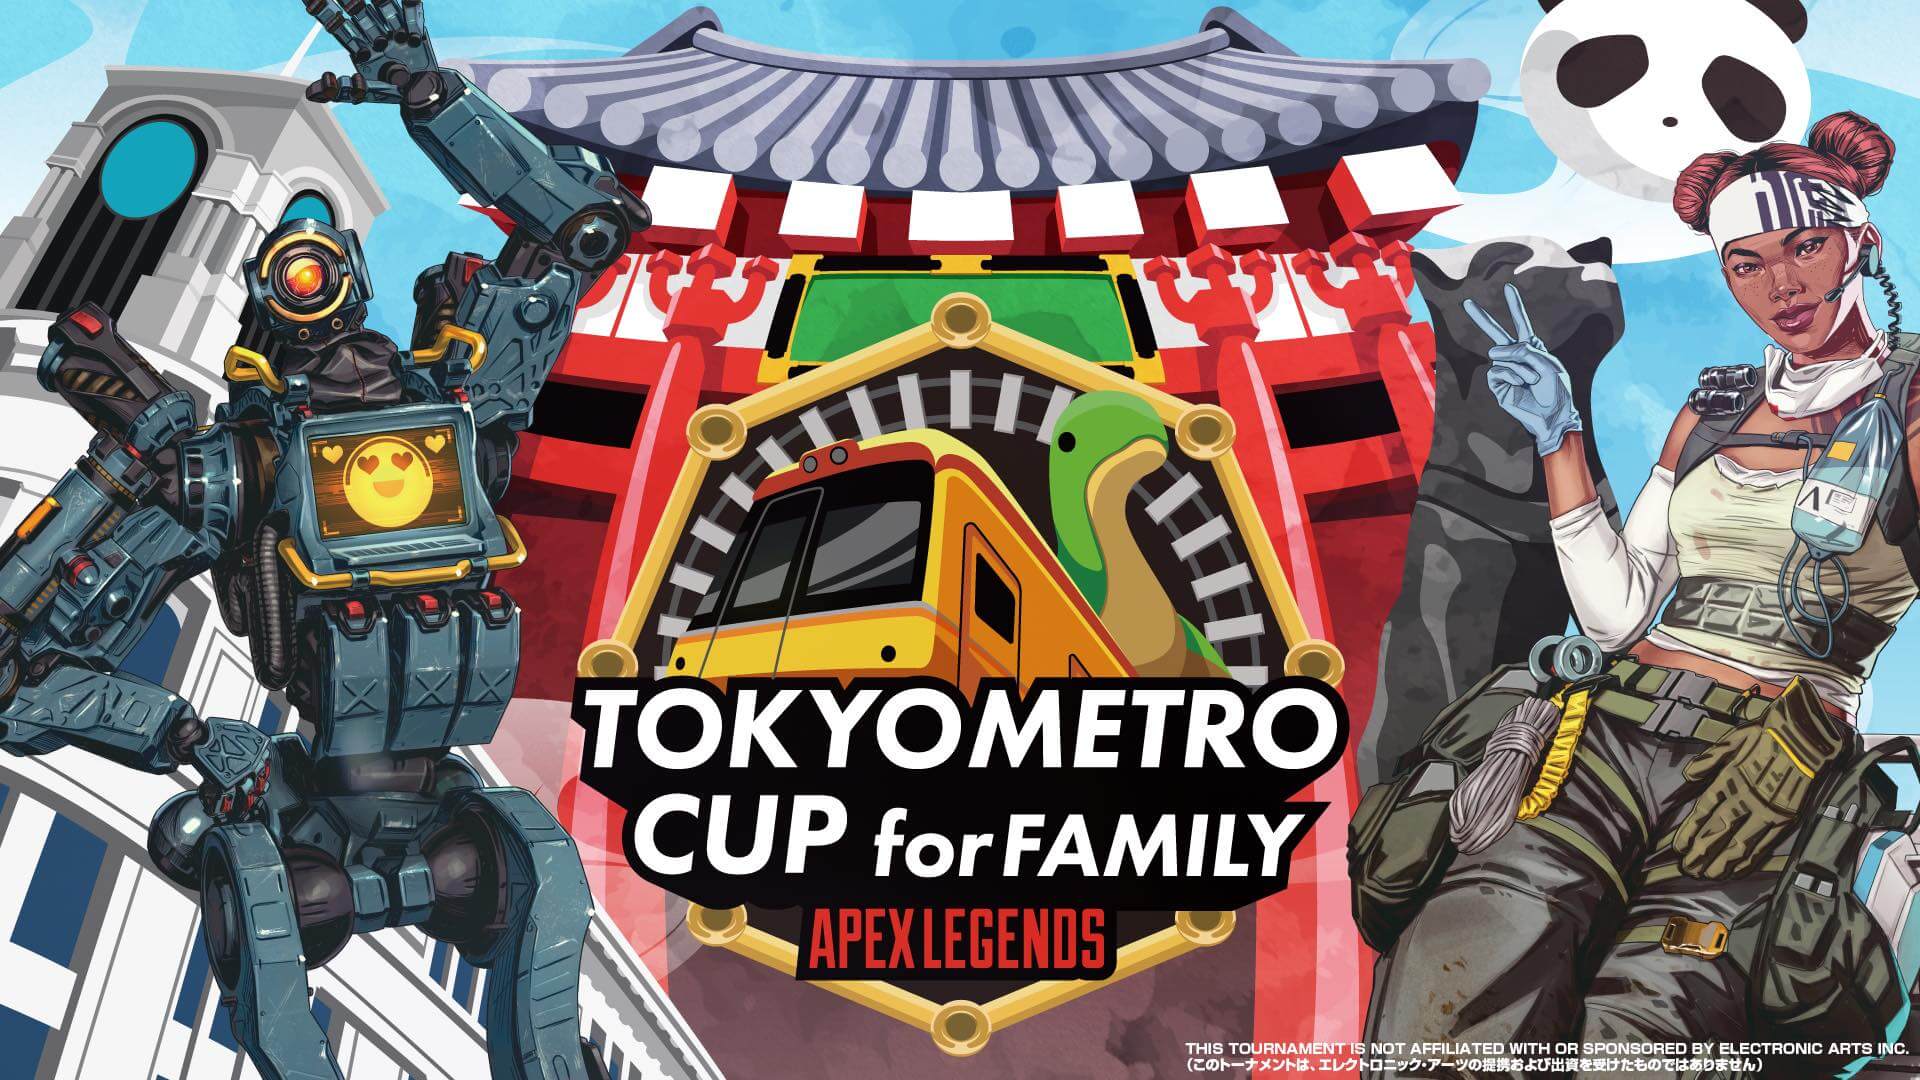 TOKYO METRO CUP for FAMILY APEXLEGENDS